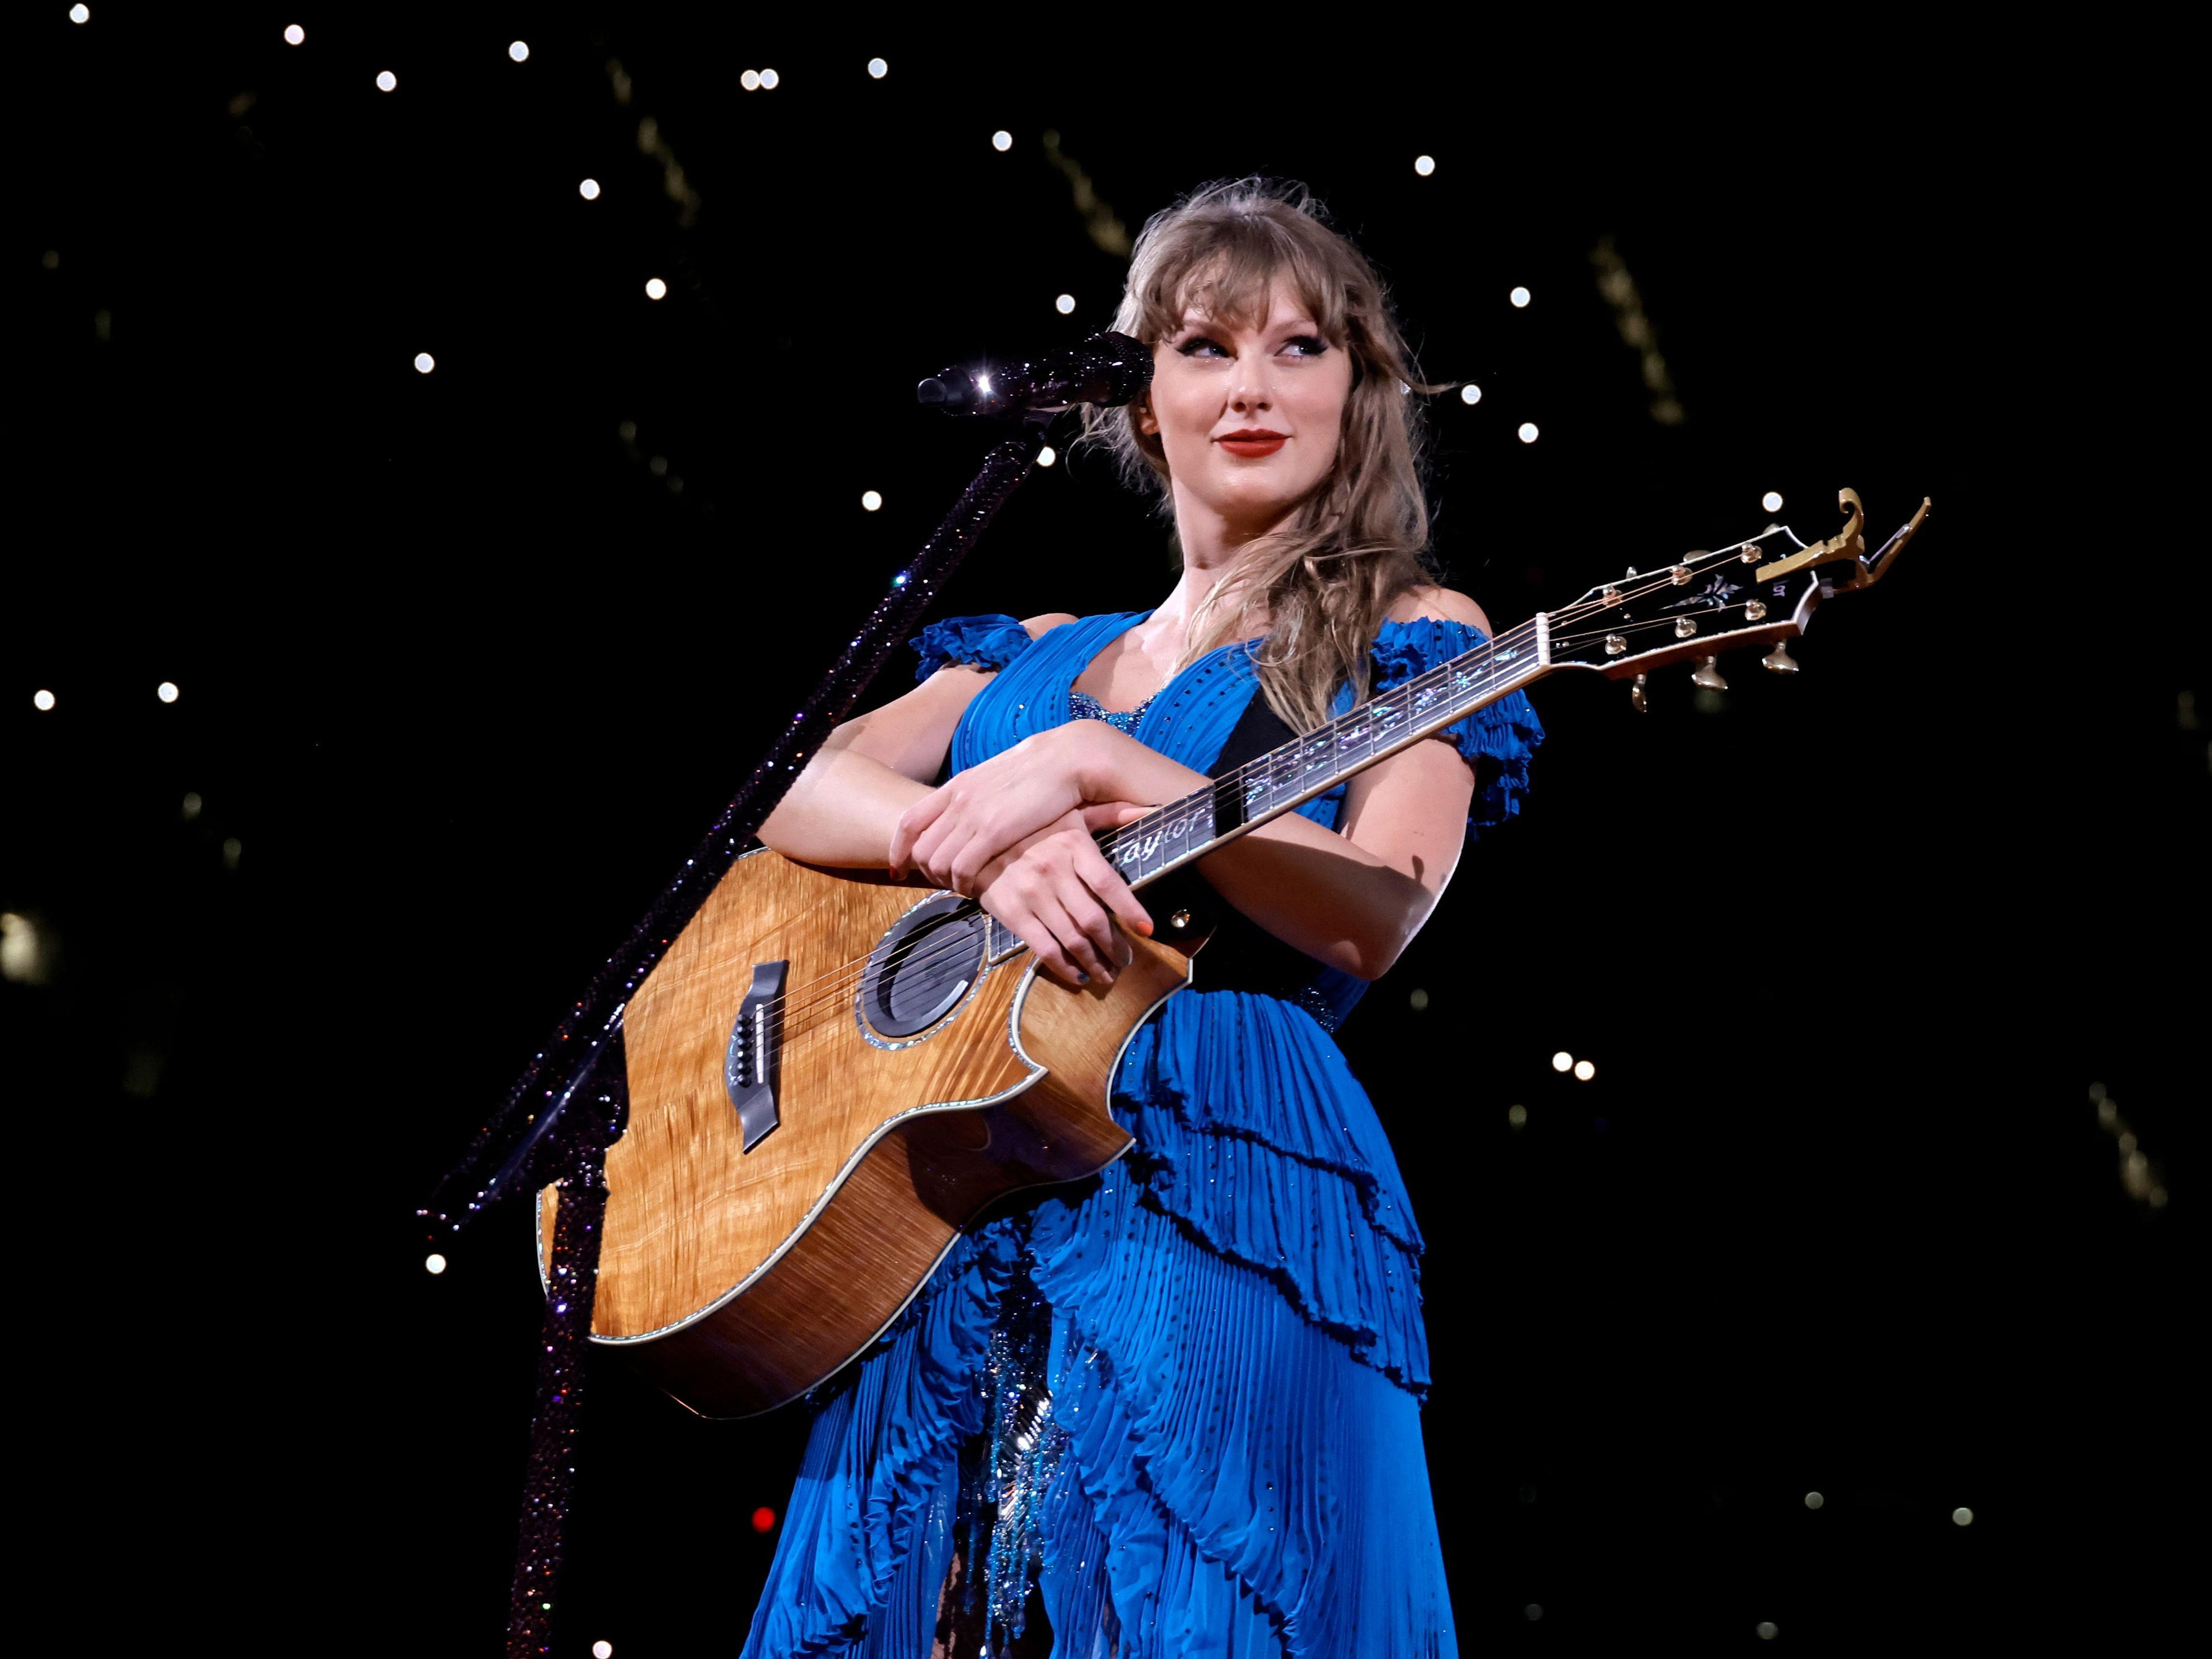 <ul class="summary-list"> <li>Taylor Swift has wrapped the first US leg for her blockbuster Eras Tour.</li> <li>Each night, she did an acoustic set with two surprise songs that were unlikely to be repeated.</li> <li>Swift performed "New Romantics" and "New Year's Day" for her sixth and final show in Los Angeles.</li> </ul><div class="read-original">Read the original article on <a href="https://www.insider.com/taylor-swift-eras-tour-surprise-songs-acoustic-2023-4">Insider</a></div>